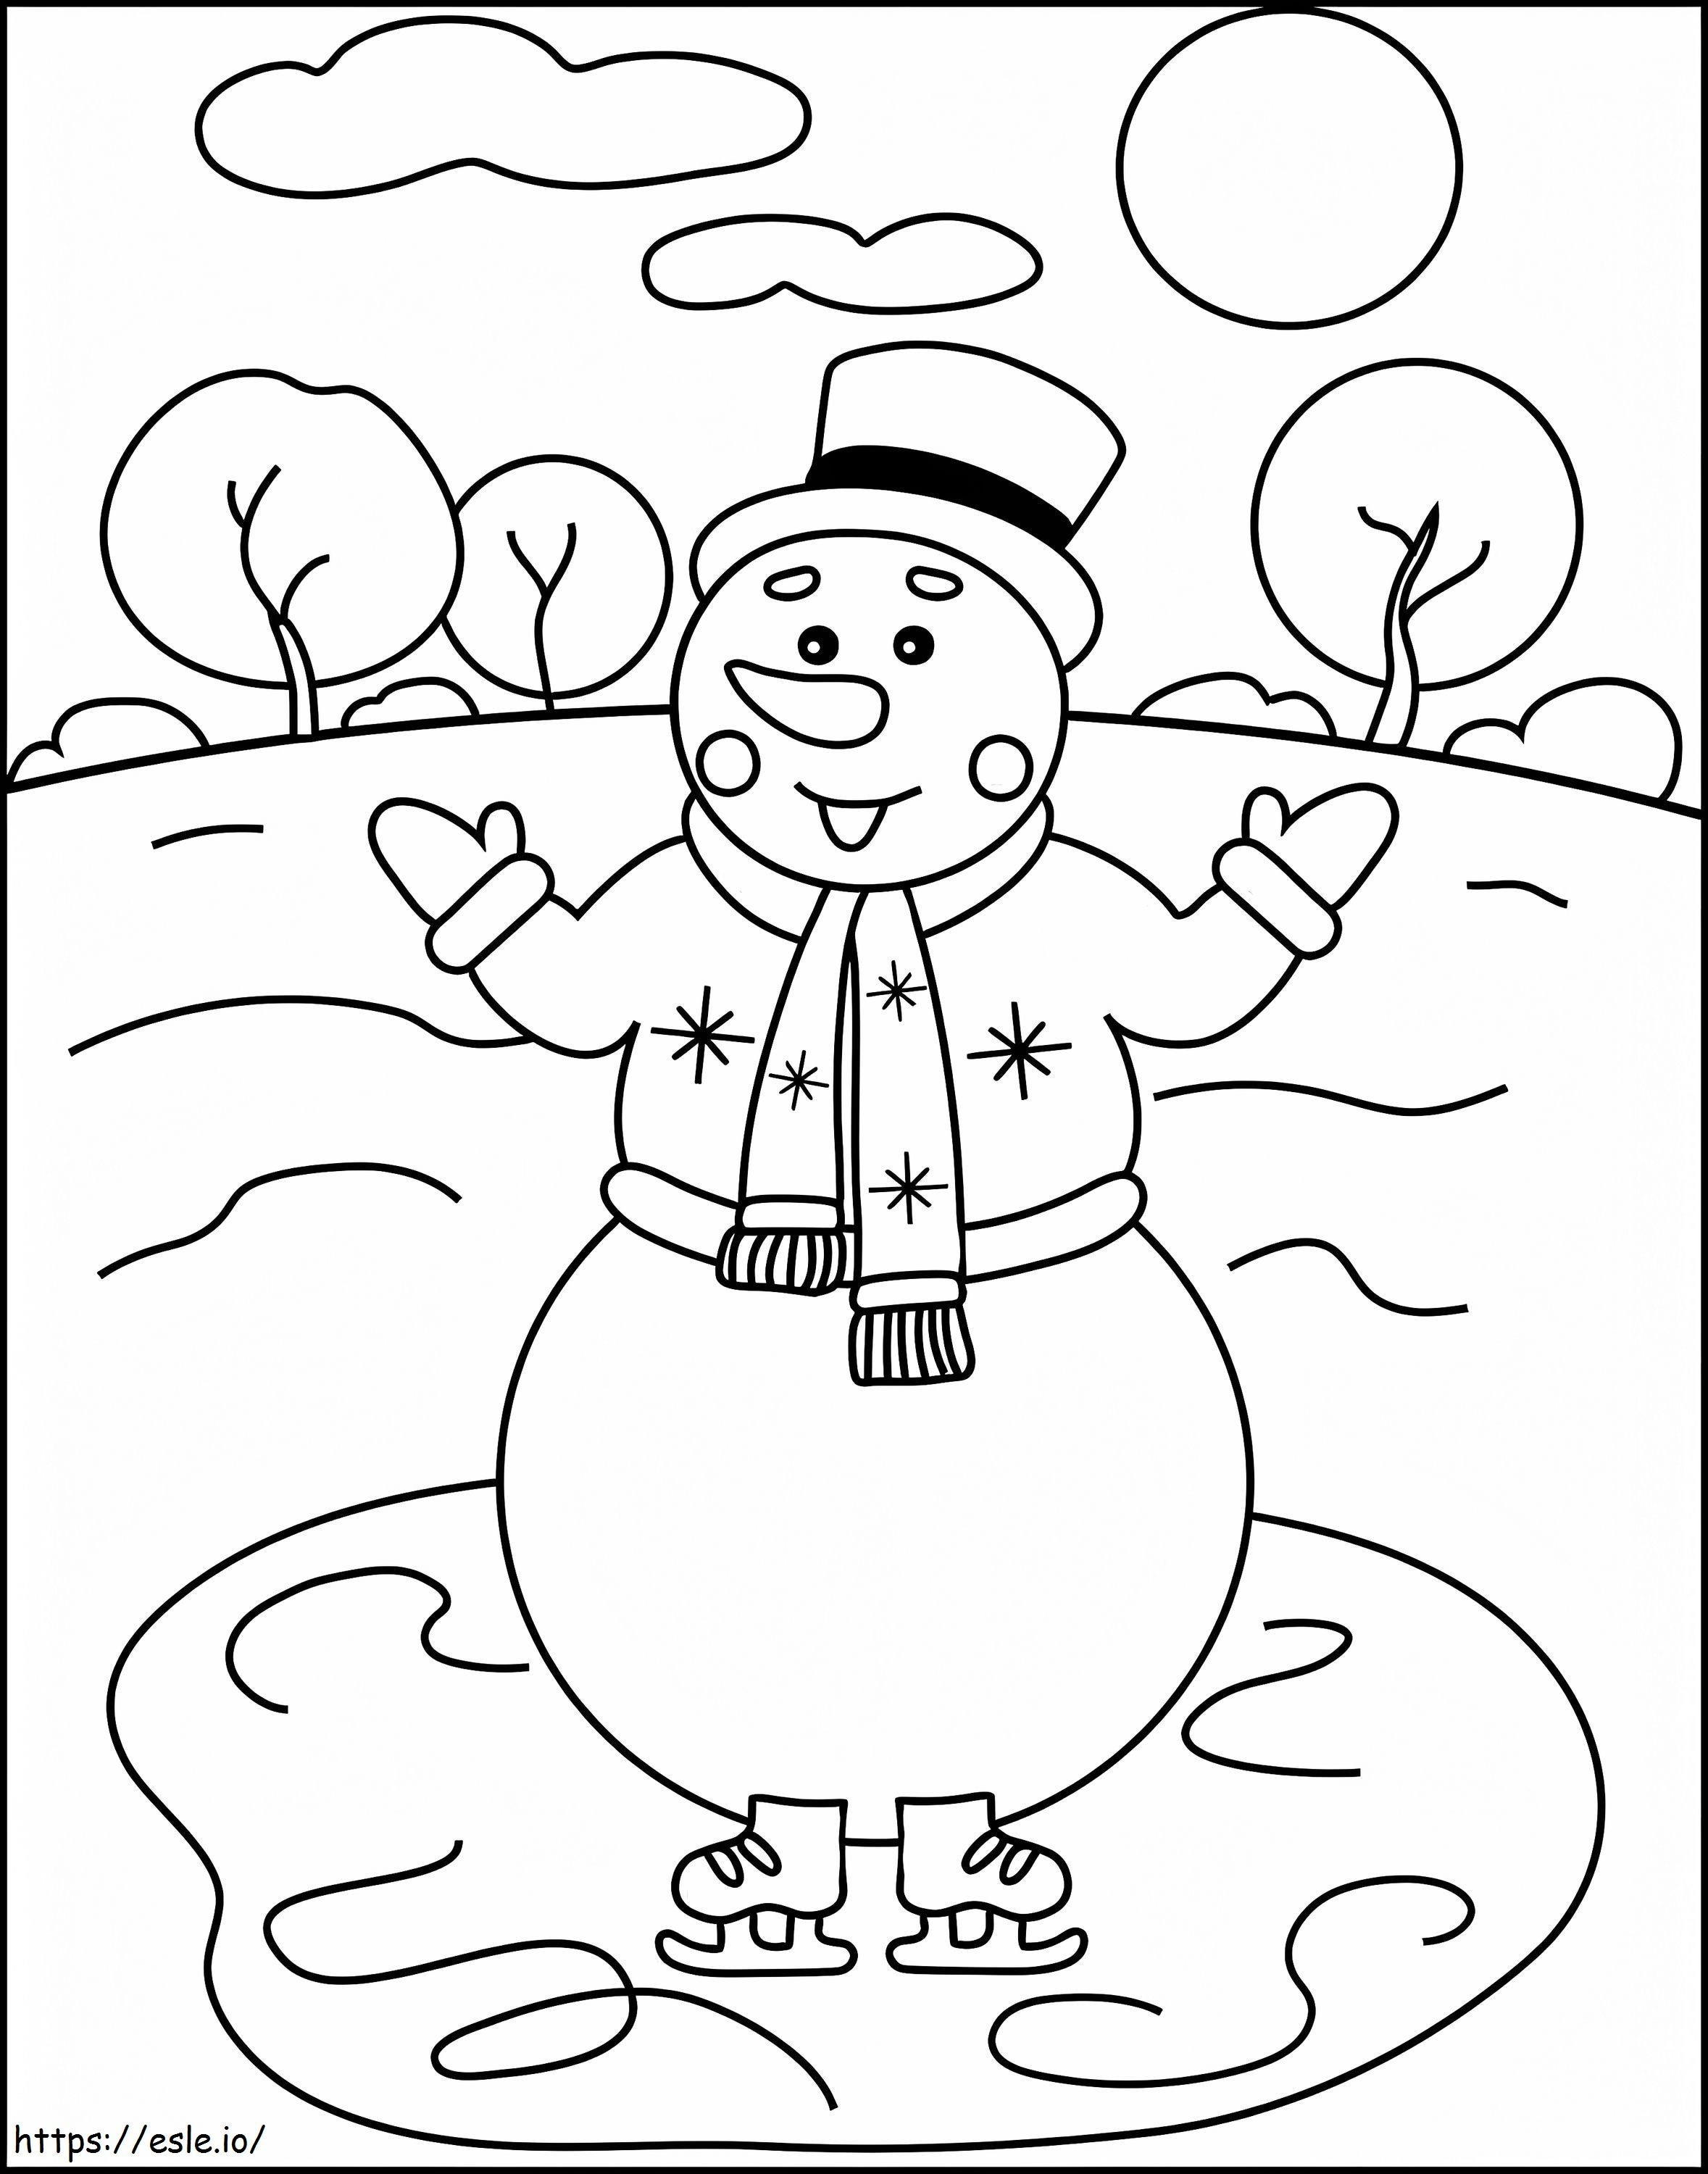 Christmas Snowman coloring page